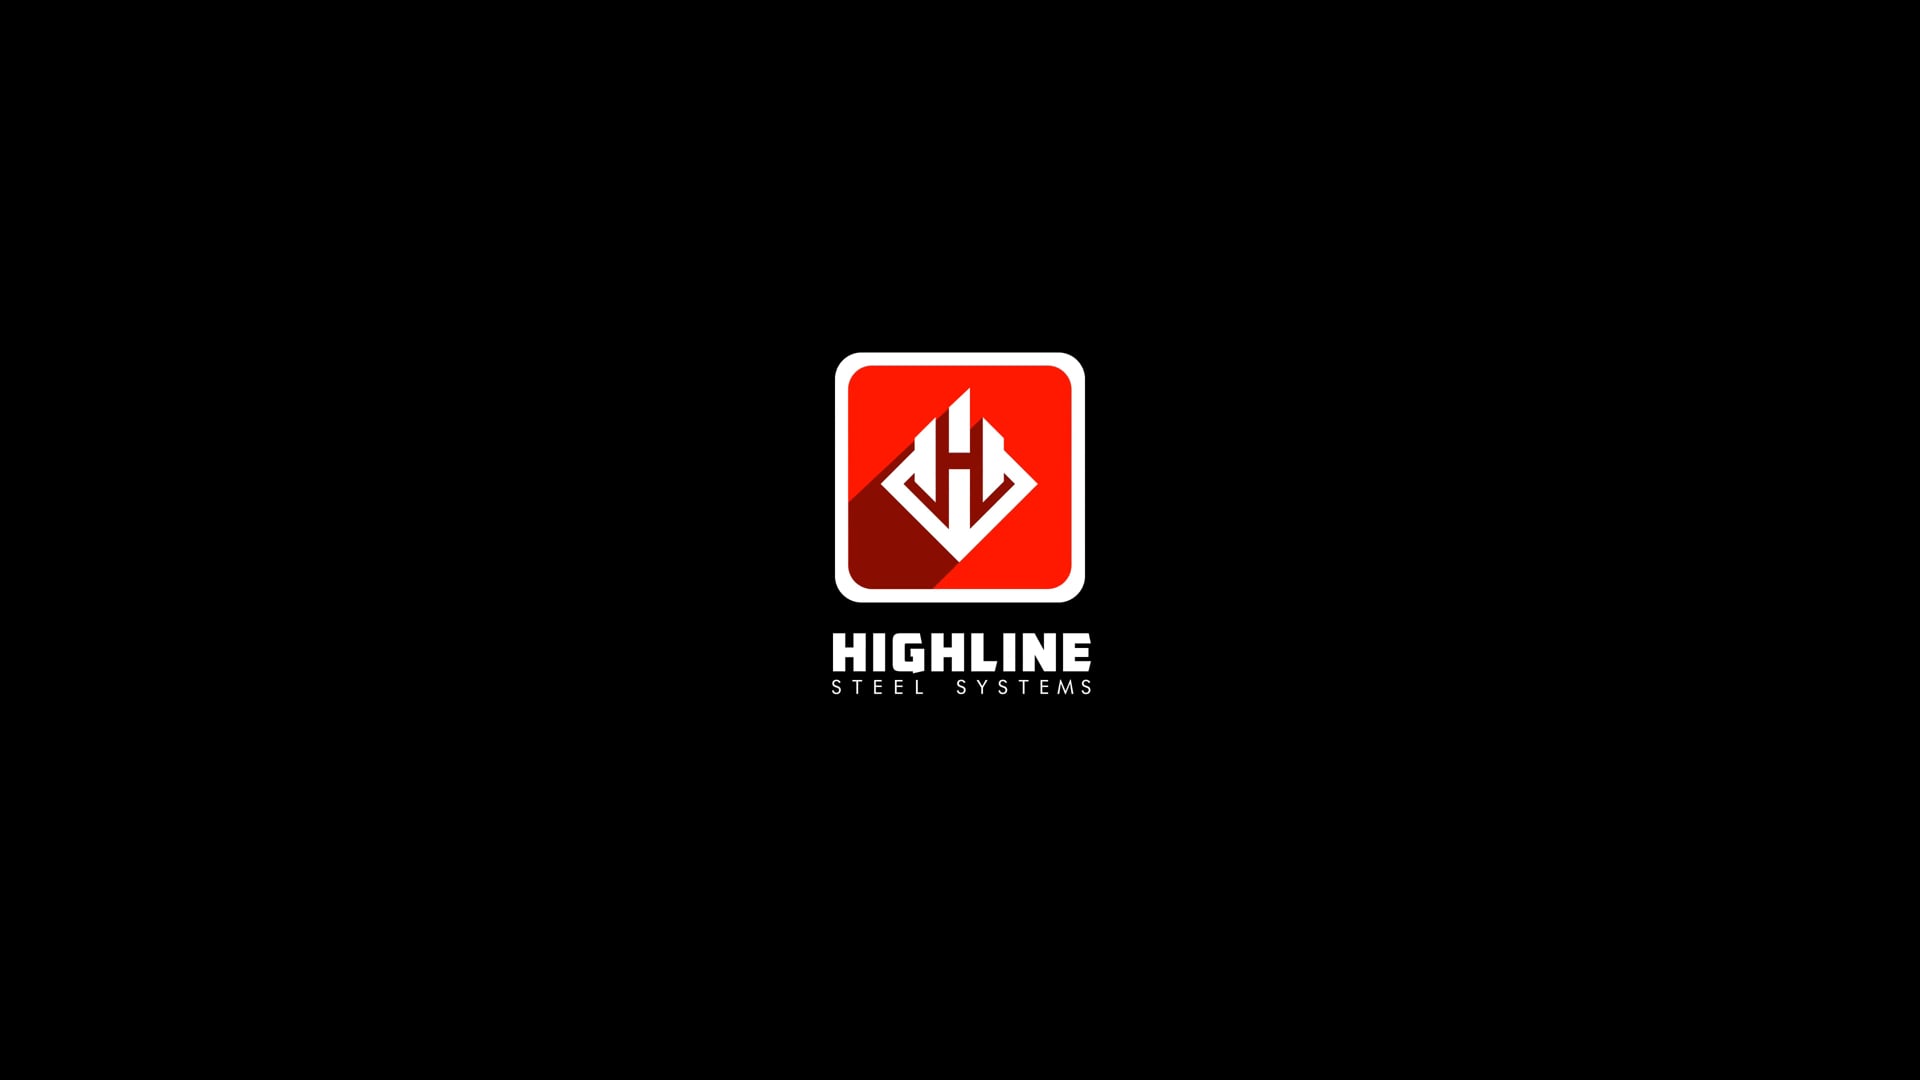 HIGHLINE STEEL SYSTEMS FURNISH AND ERECT